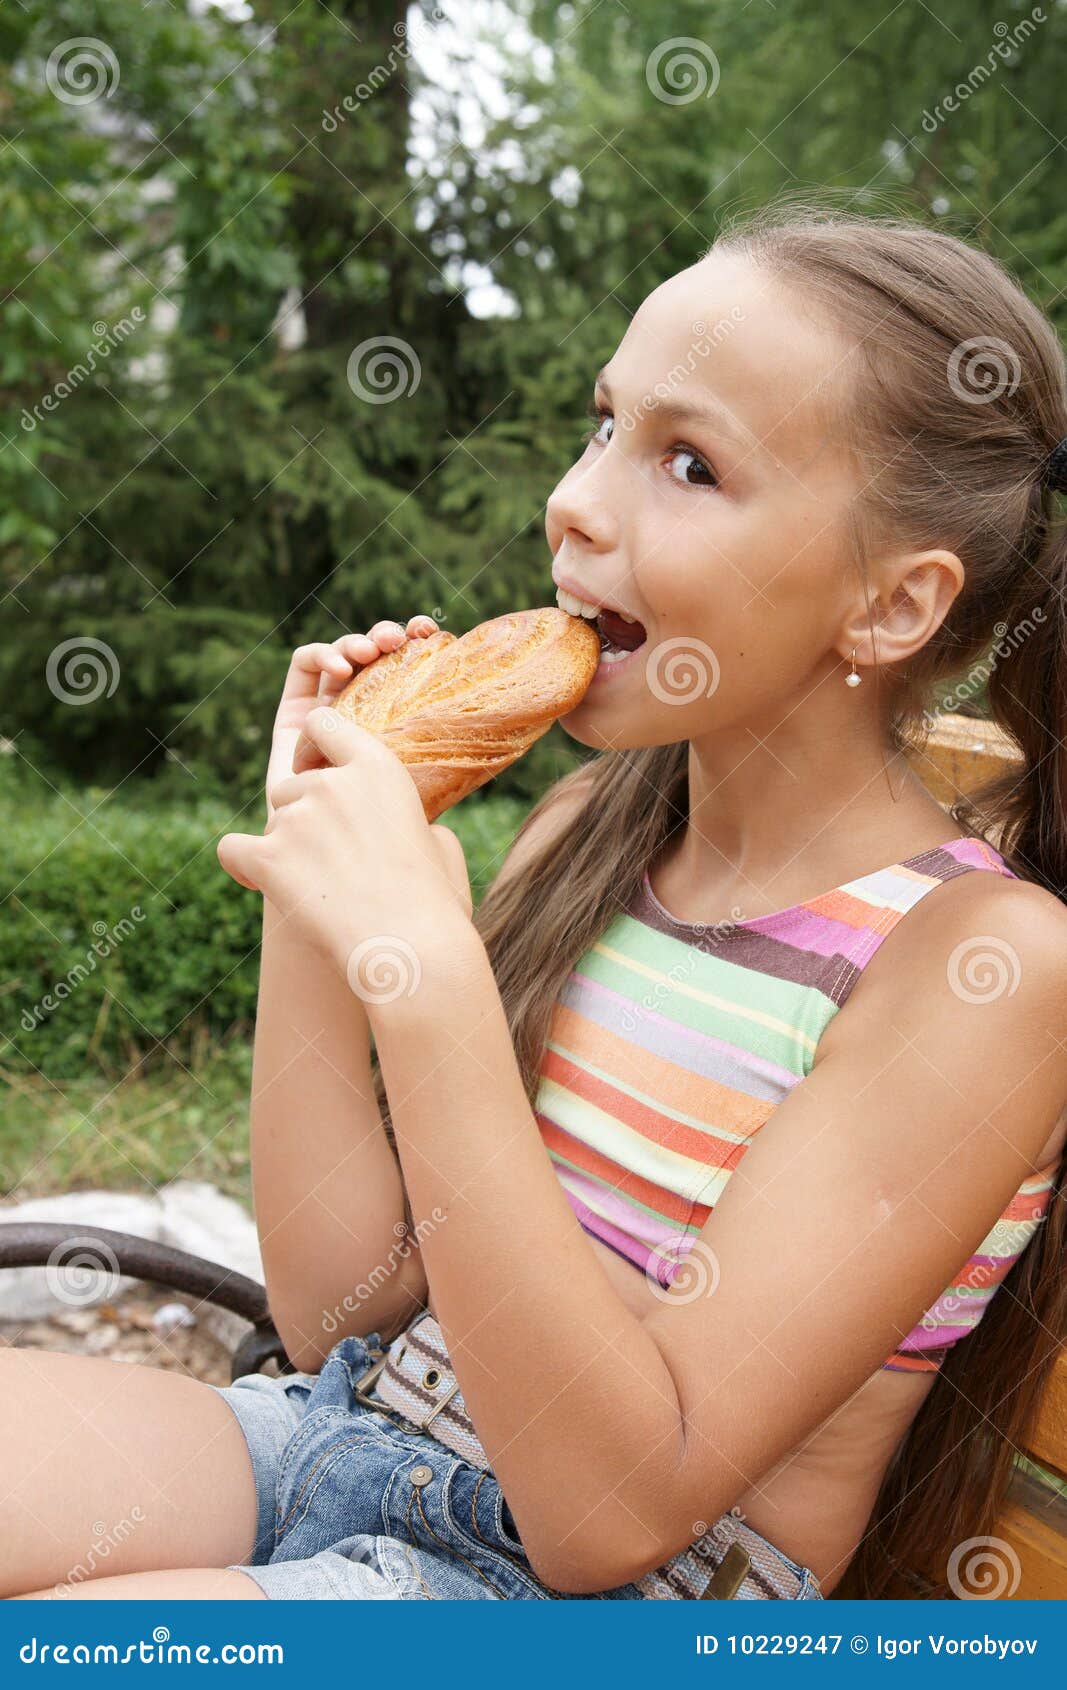 Girl Eats With A Spoon Dairy Product picture